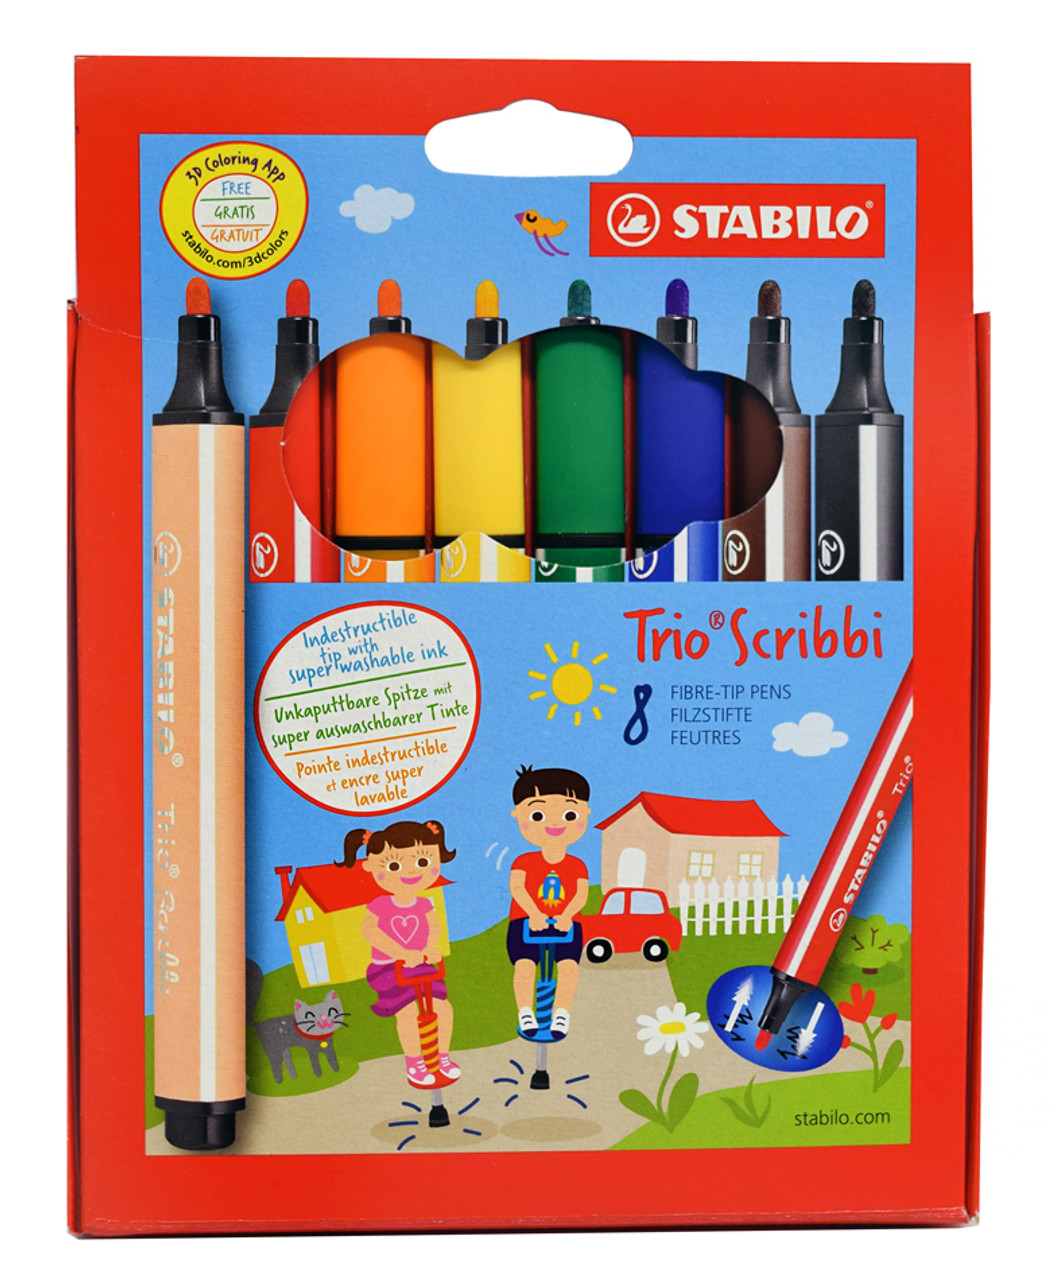 All STABILO products for writing